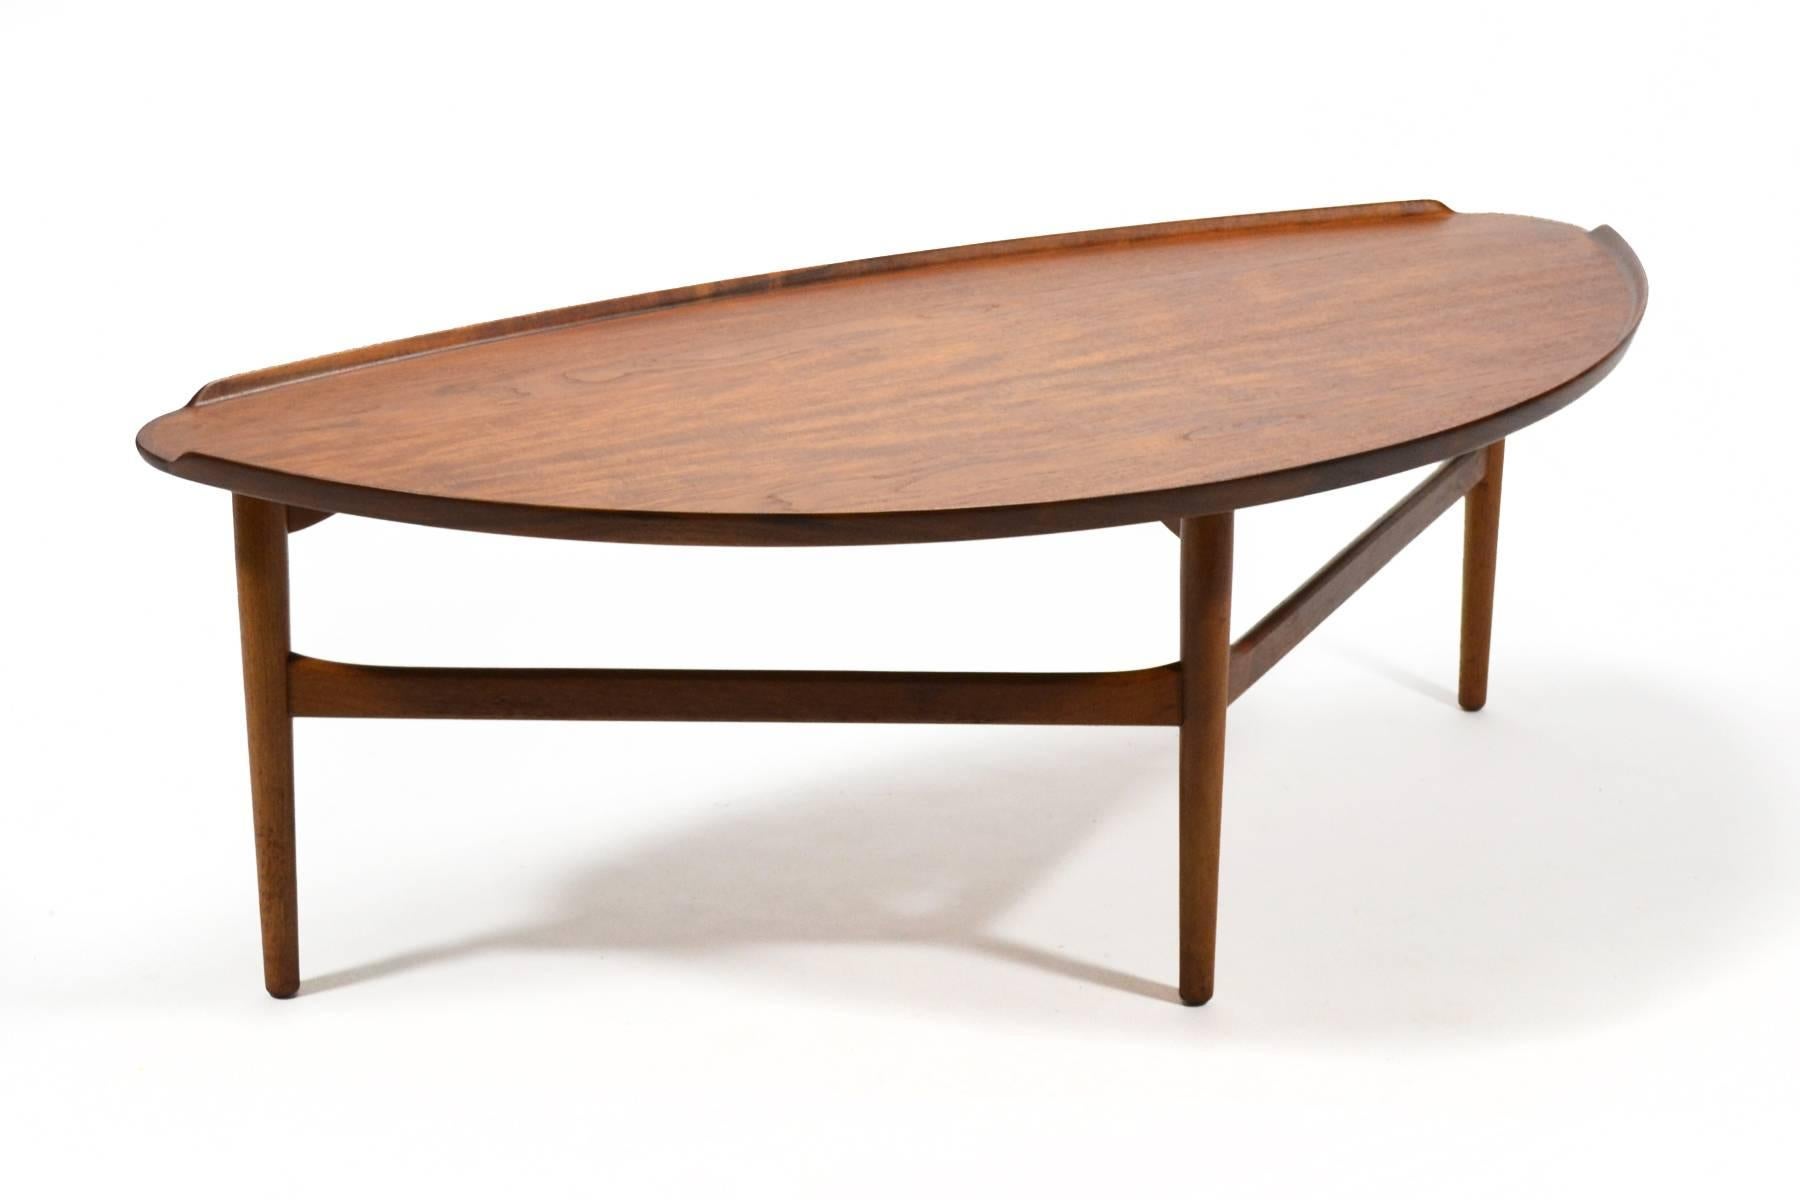 Designed by Danish master Finn Juhl and crafted by Baker Furniture in the US, this large cocktail table is exquisite.

Finn Juhl was skeptical that any American manufacturer could produce his designs to his exacting standards. After visiting Baker